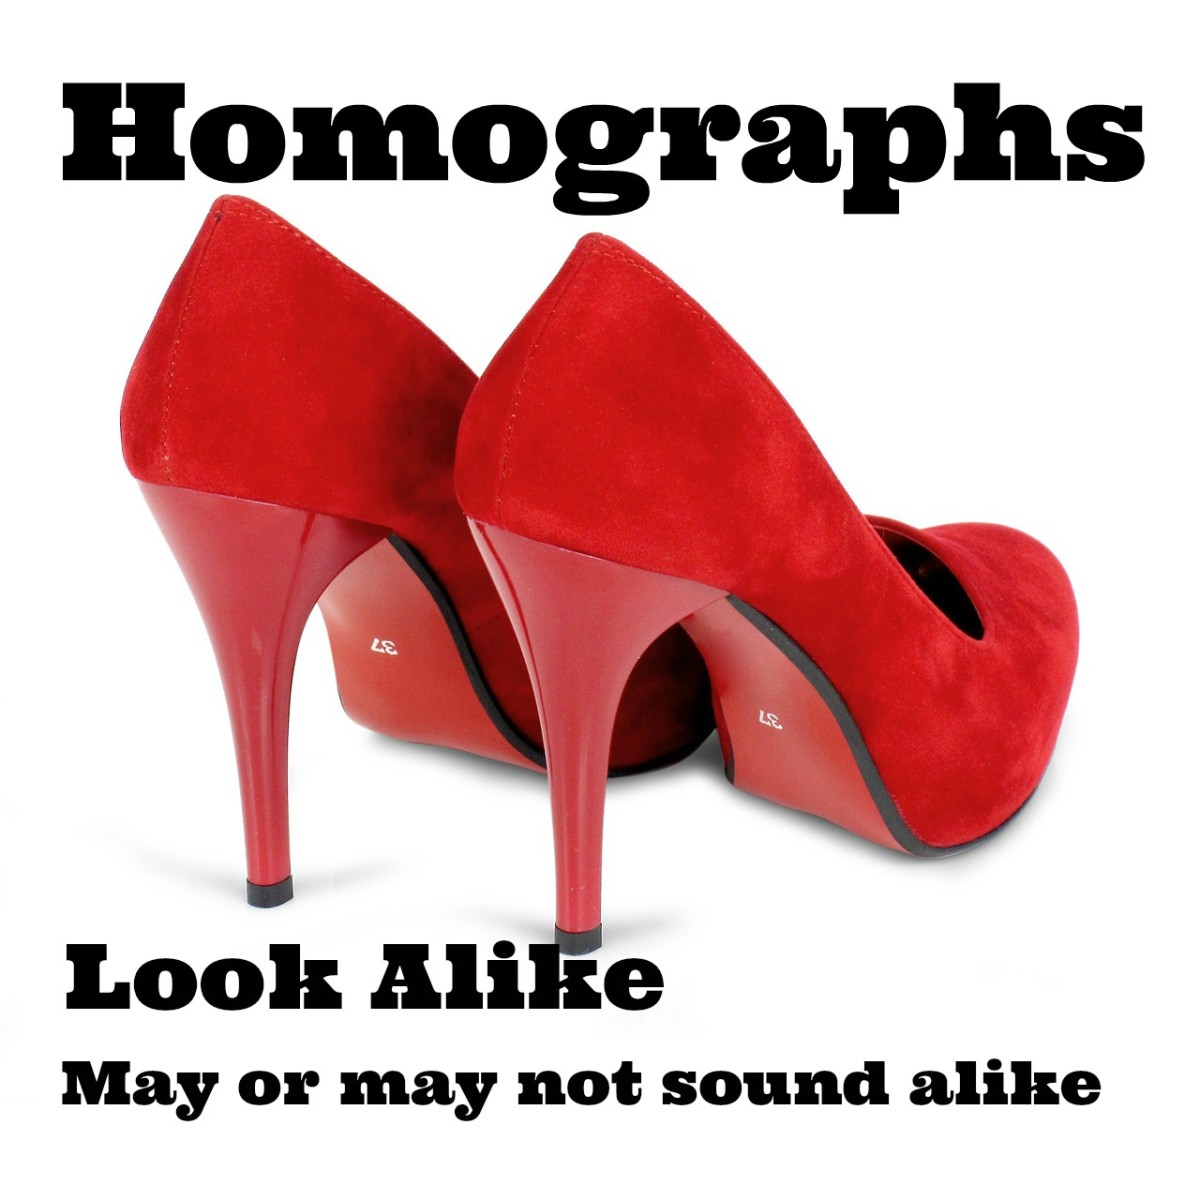 Homographs are words that look alike, but may or may not sound alike. 